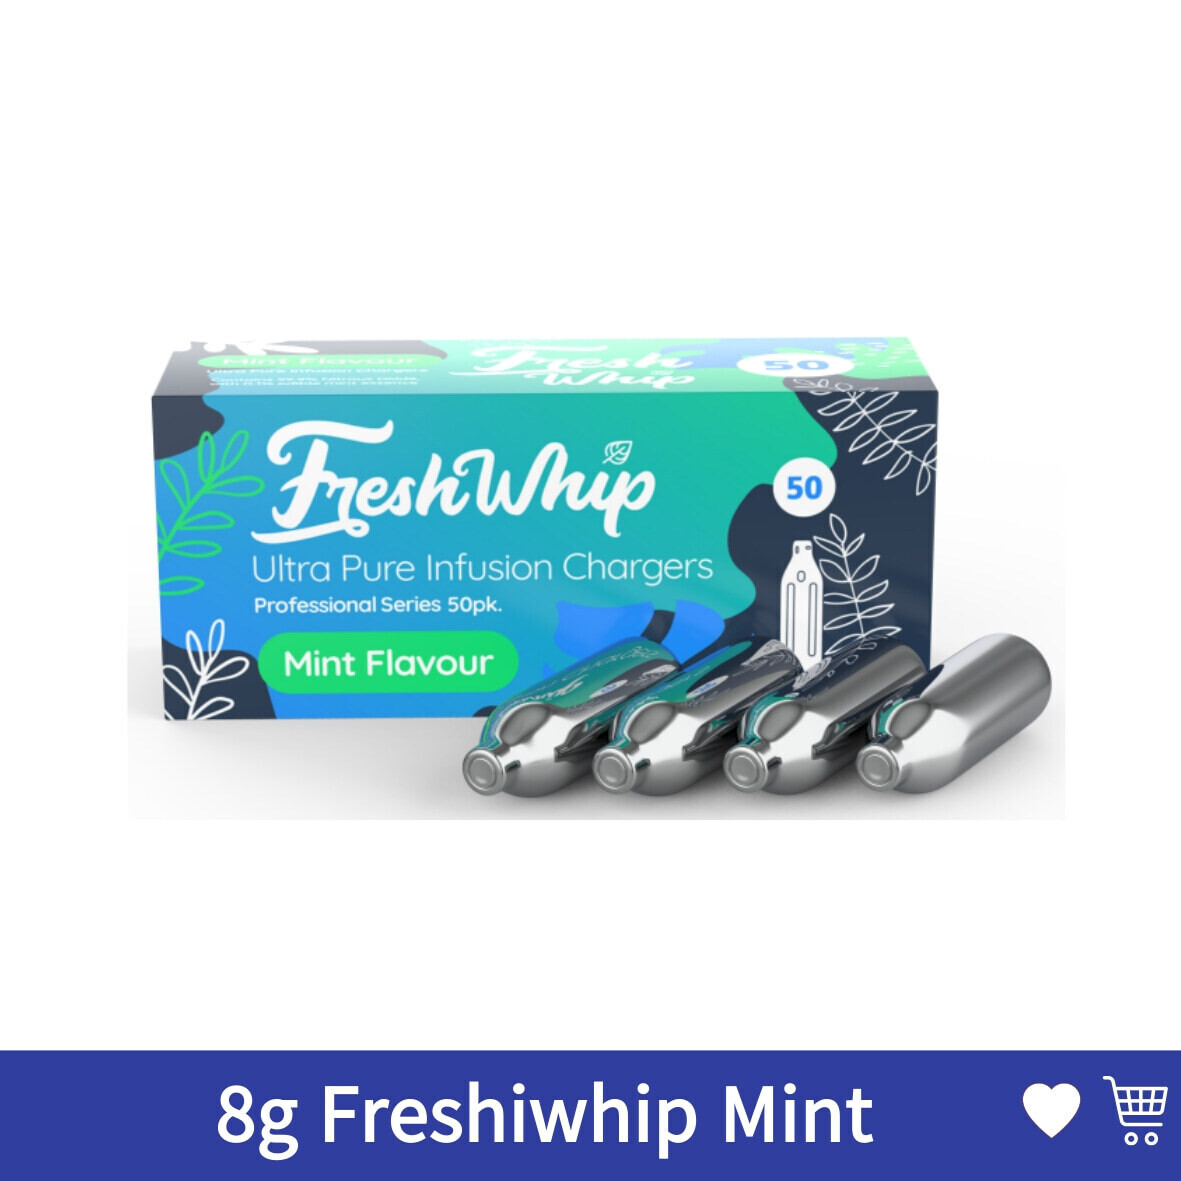 Cream Chargers: 8g FreshWhip Mint Professional